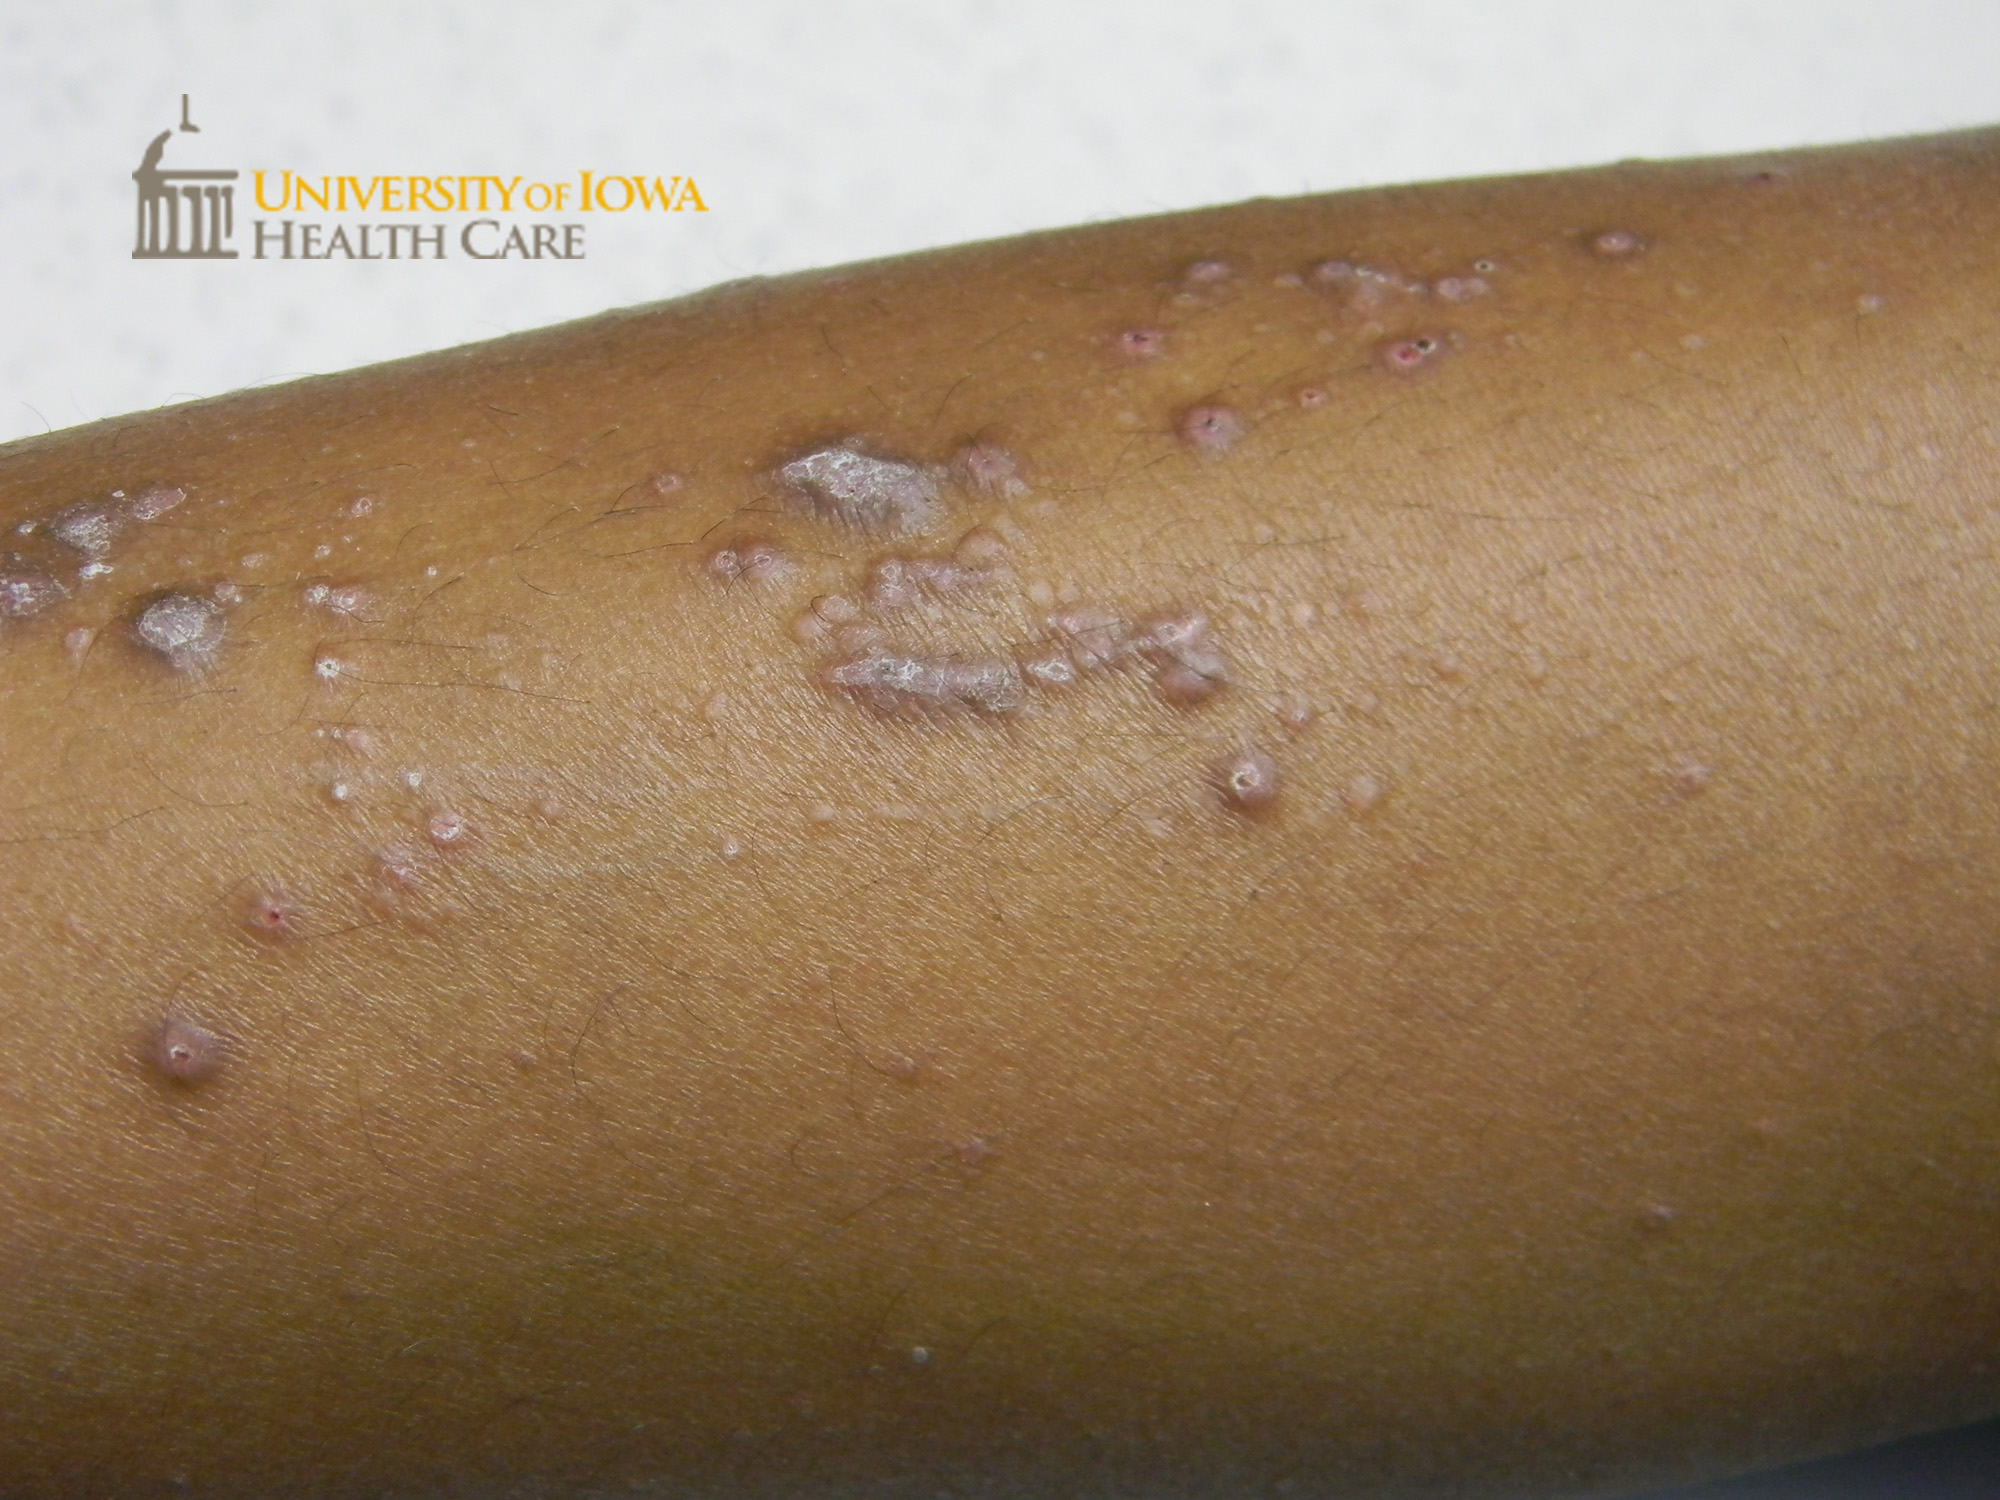 Pink to violaceous polygonal papules with overlying white scale coalesing into plaques on the lower leg. (click images for higher resolution).